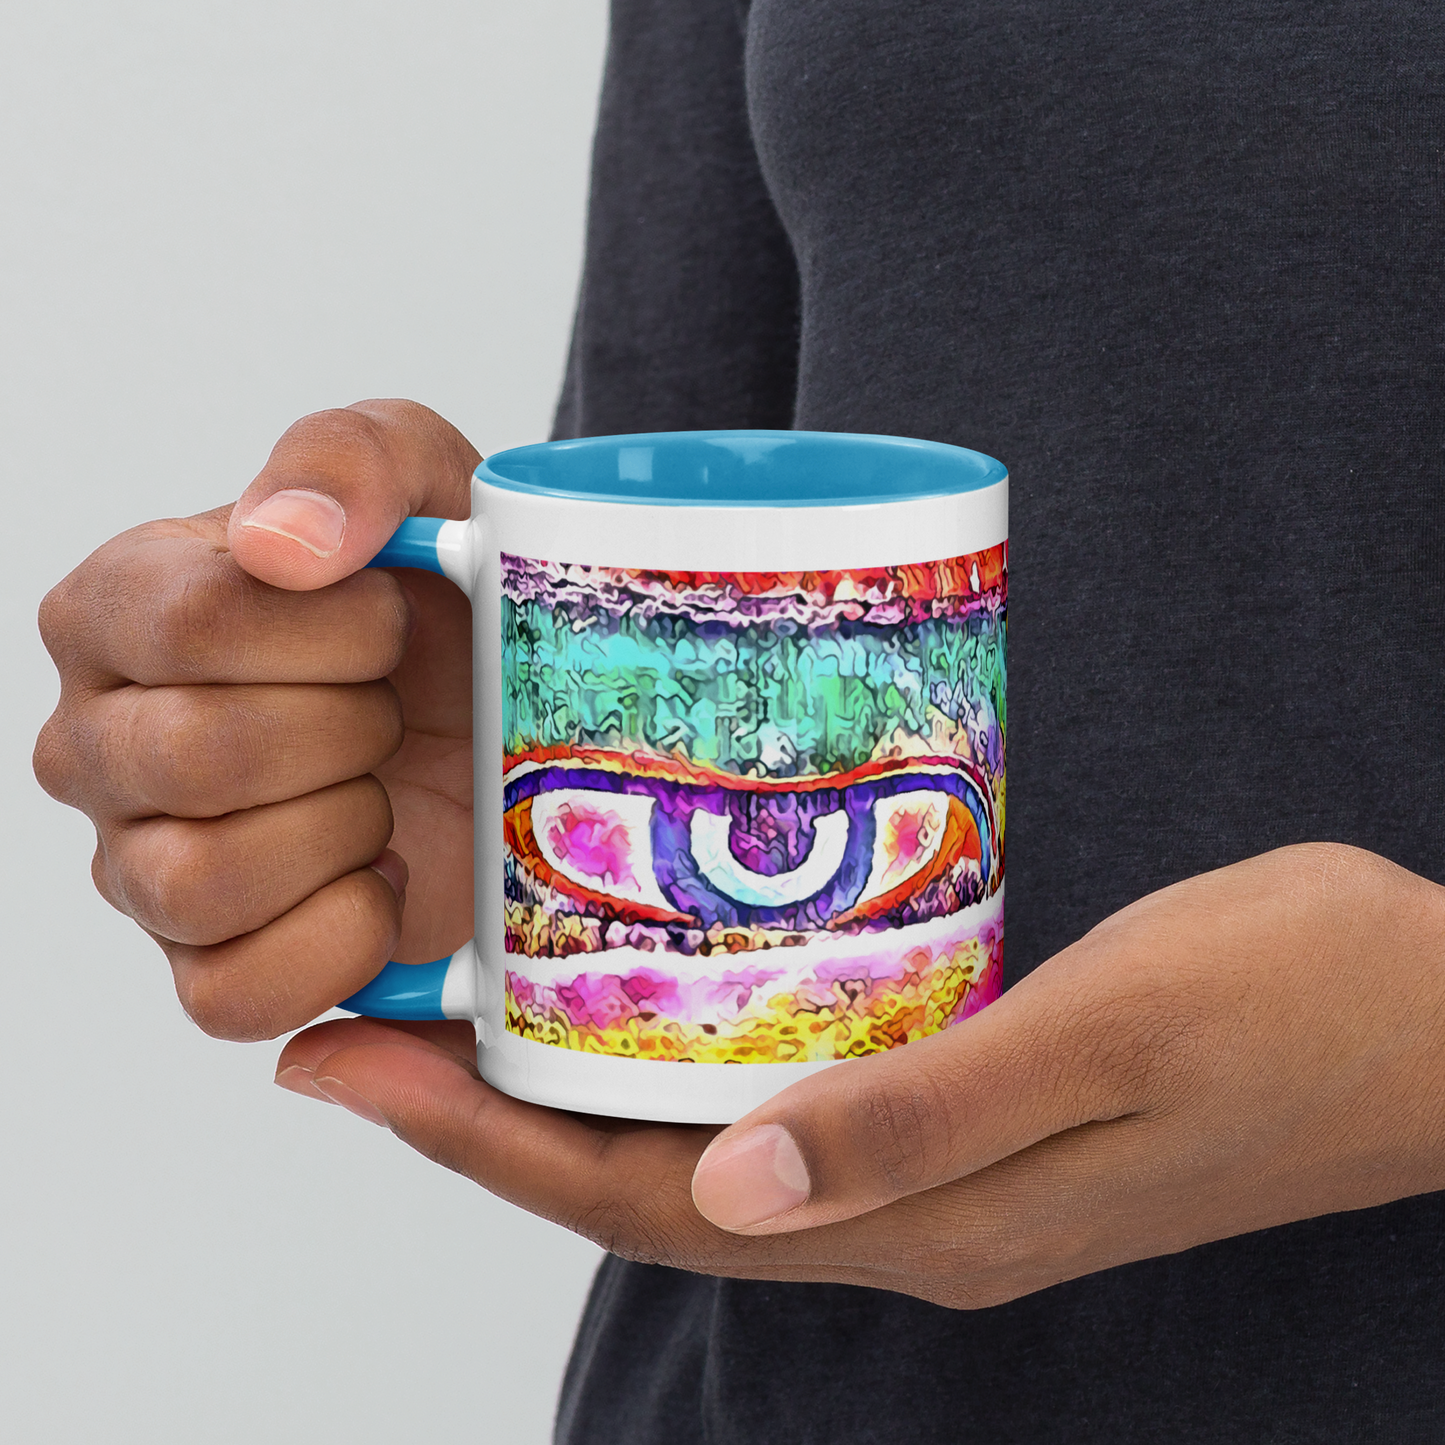 Ceramic Mug with Color Inside 'Just Seeing 1/5' artist-authorised edition of original artwork by Enmempin N. Midelobo